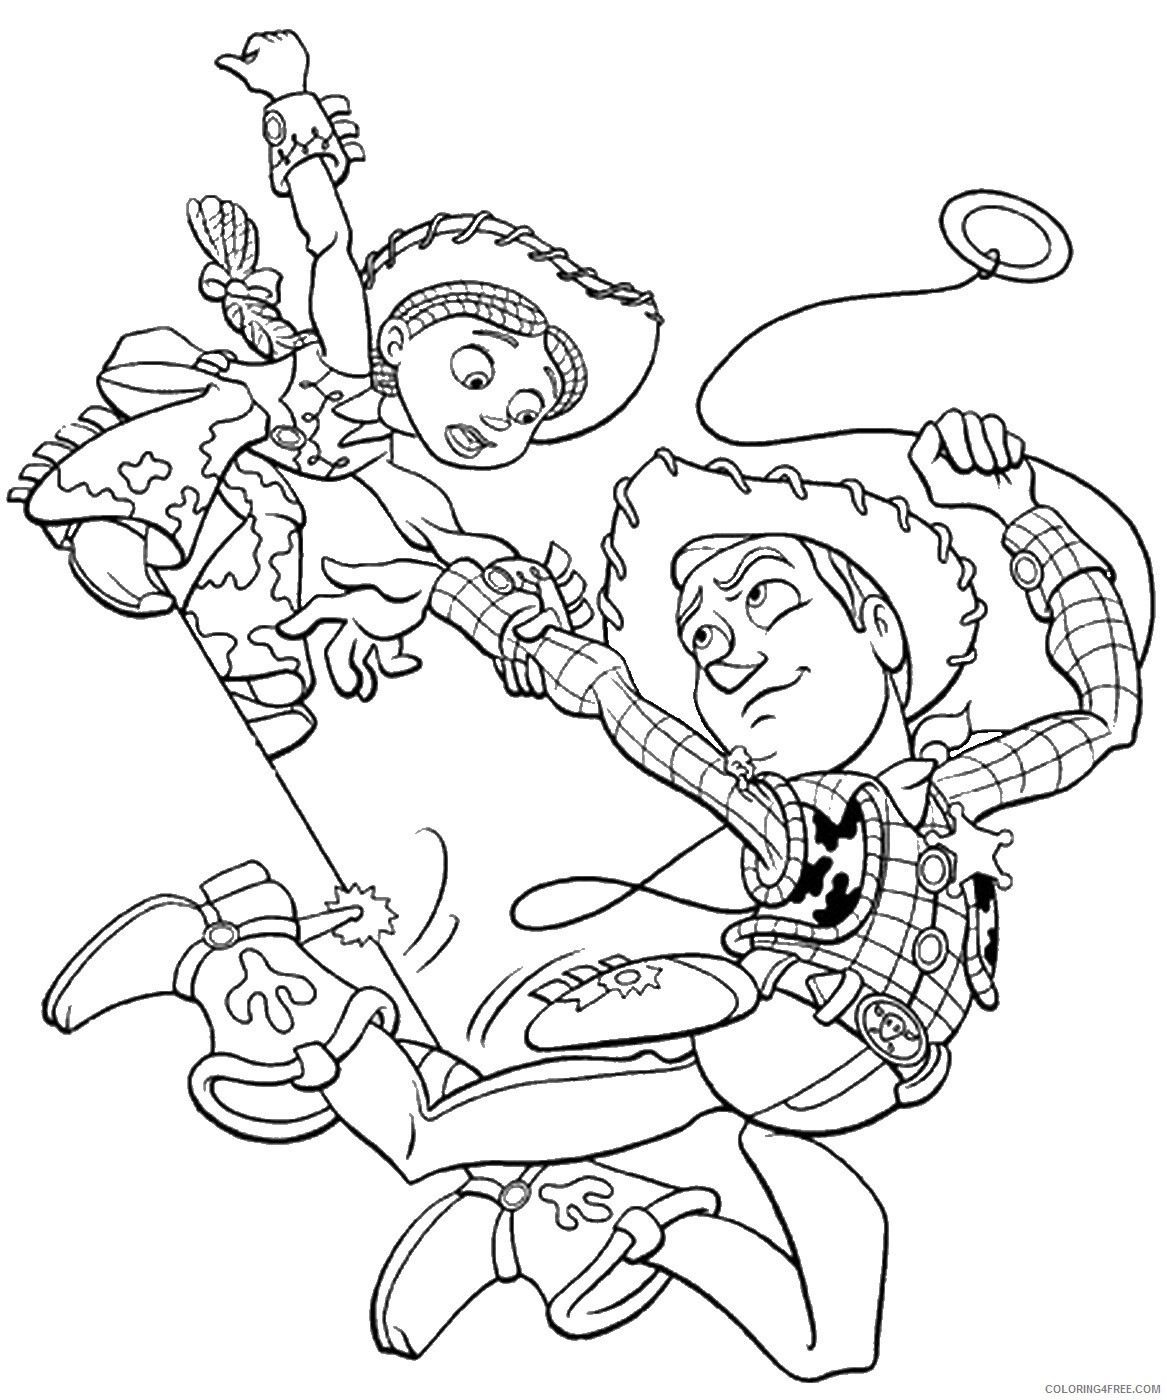 Toy Story Coloring Pages TV Film toystory_75 Printable 2020 10389 Coloring4free